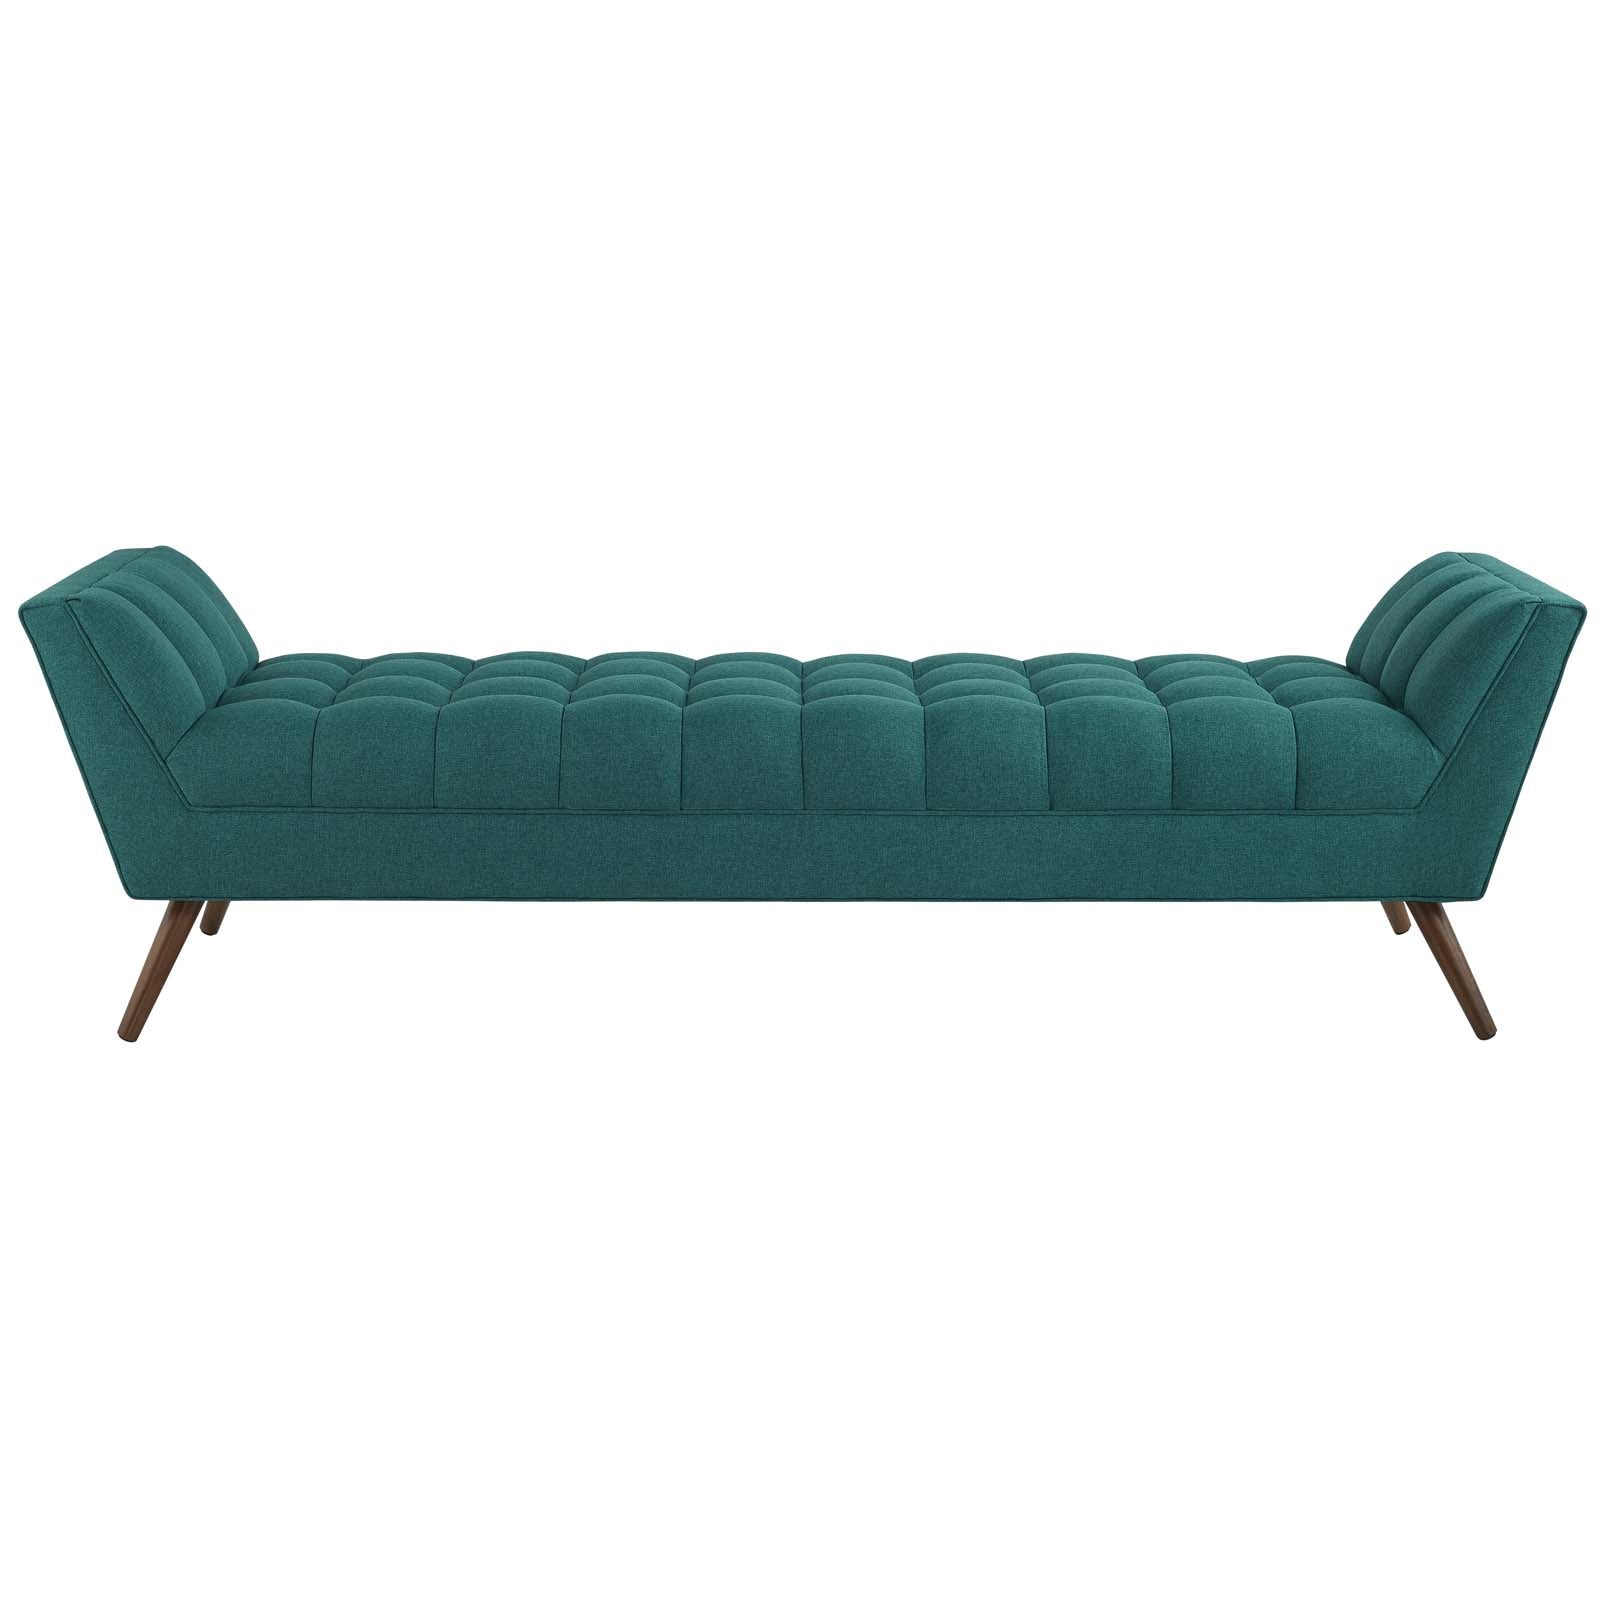 Modway Benches - Response Upholstered Fabric Bench Teal